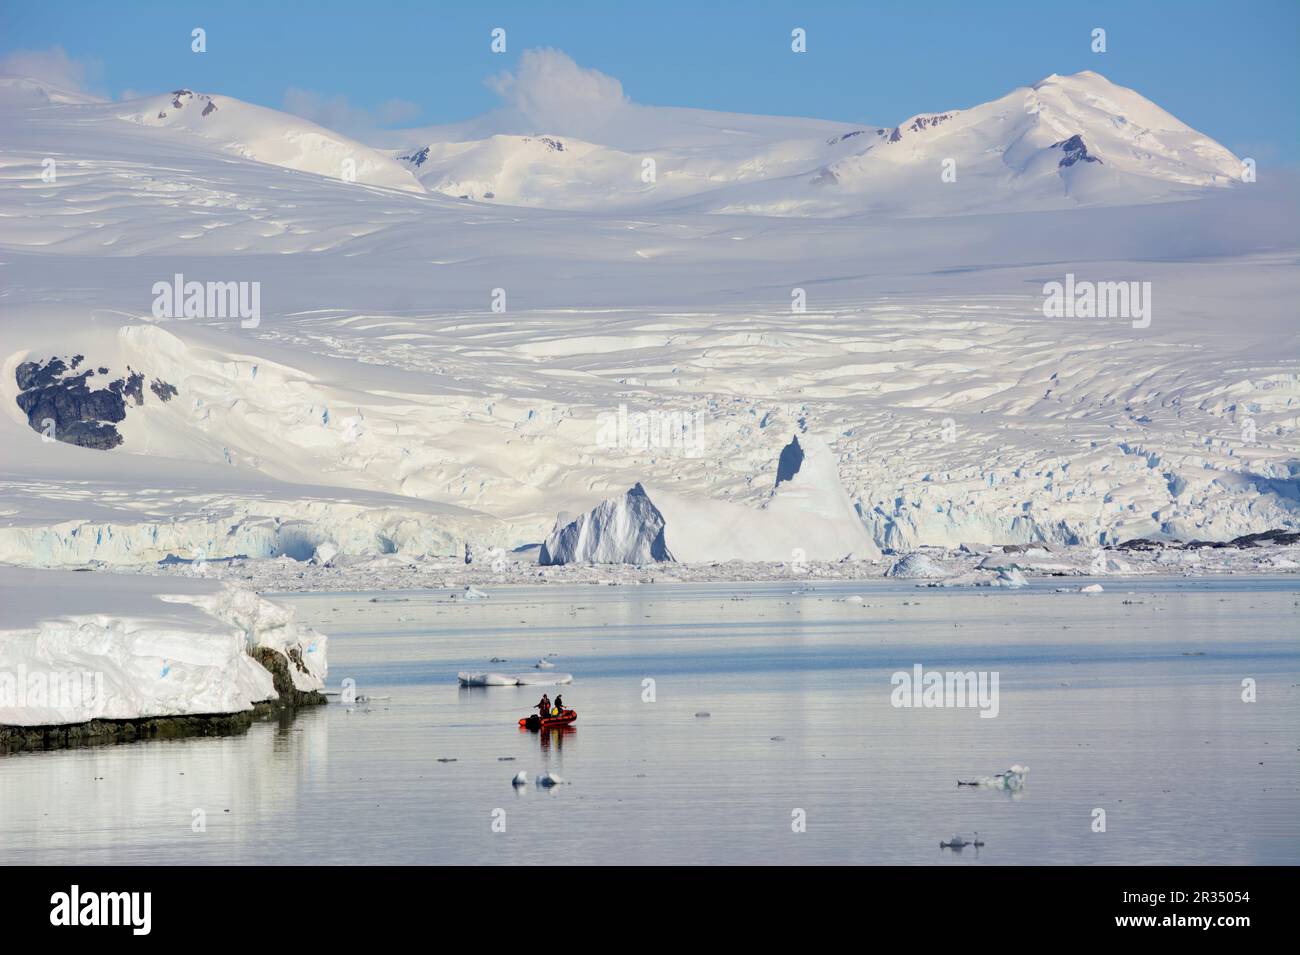 A group of tourists makes an excursion on a motorboat in Antarctica. Stock Photo